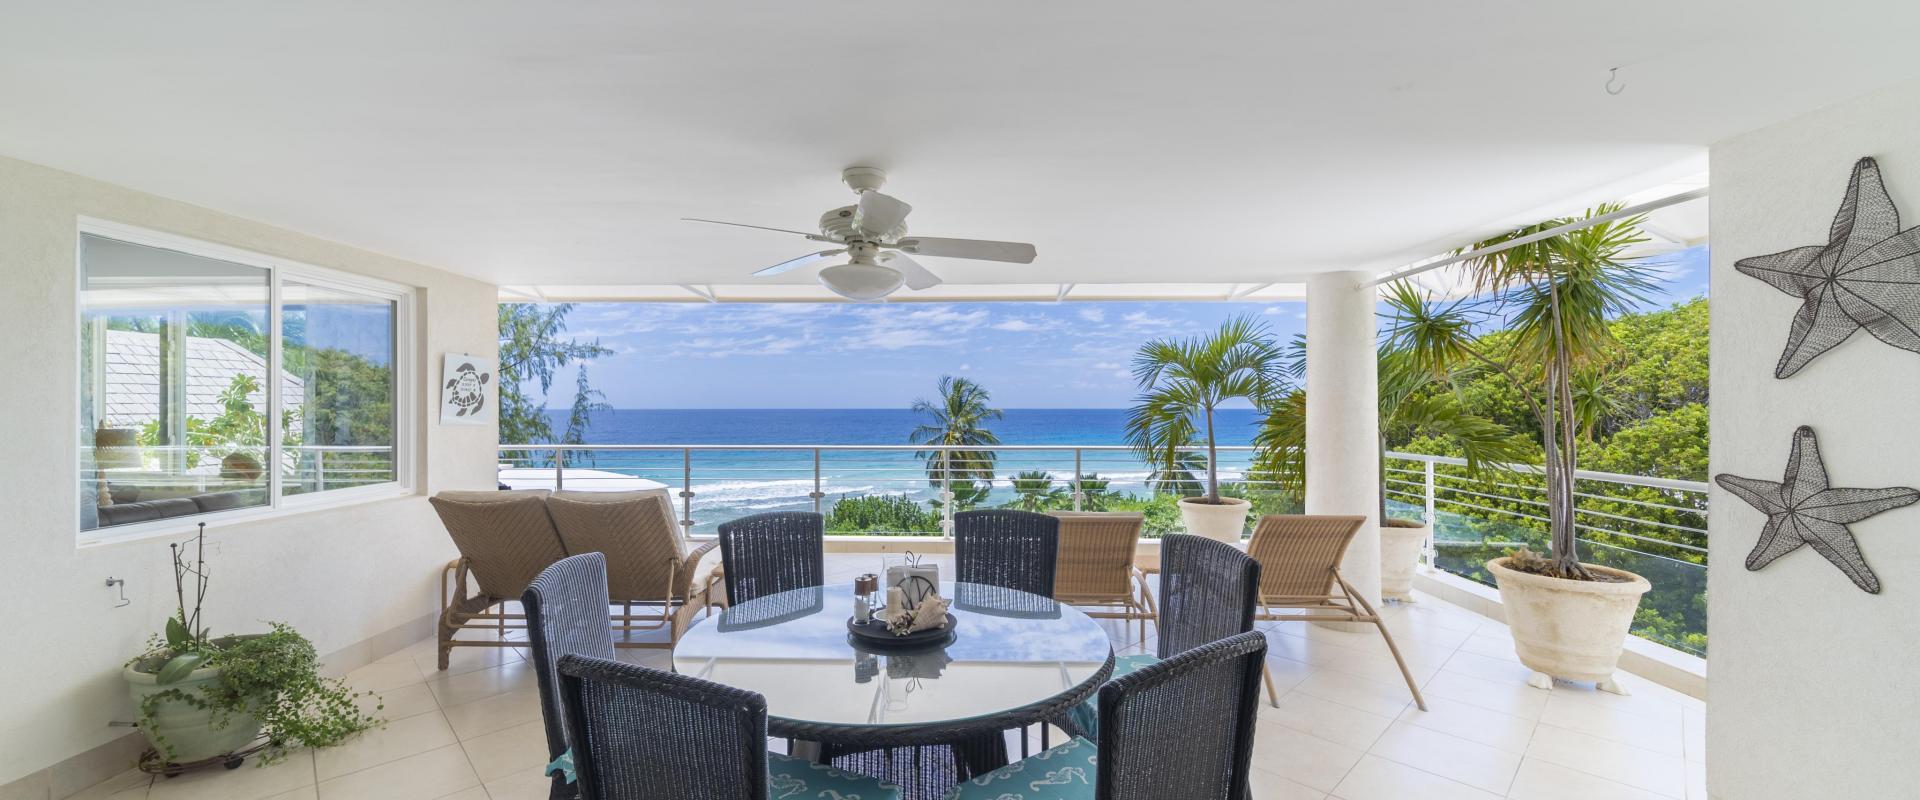 Palm Beach 502 Holiday Rental Barbados Outdoor Dining with Ocean View